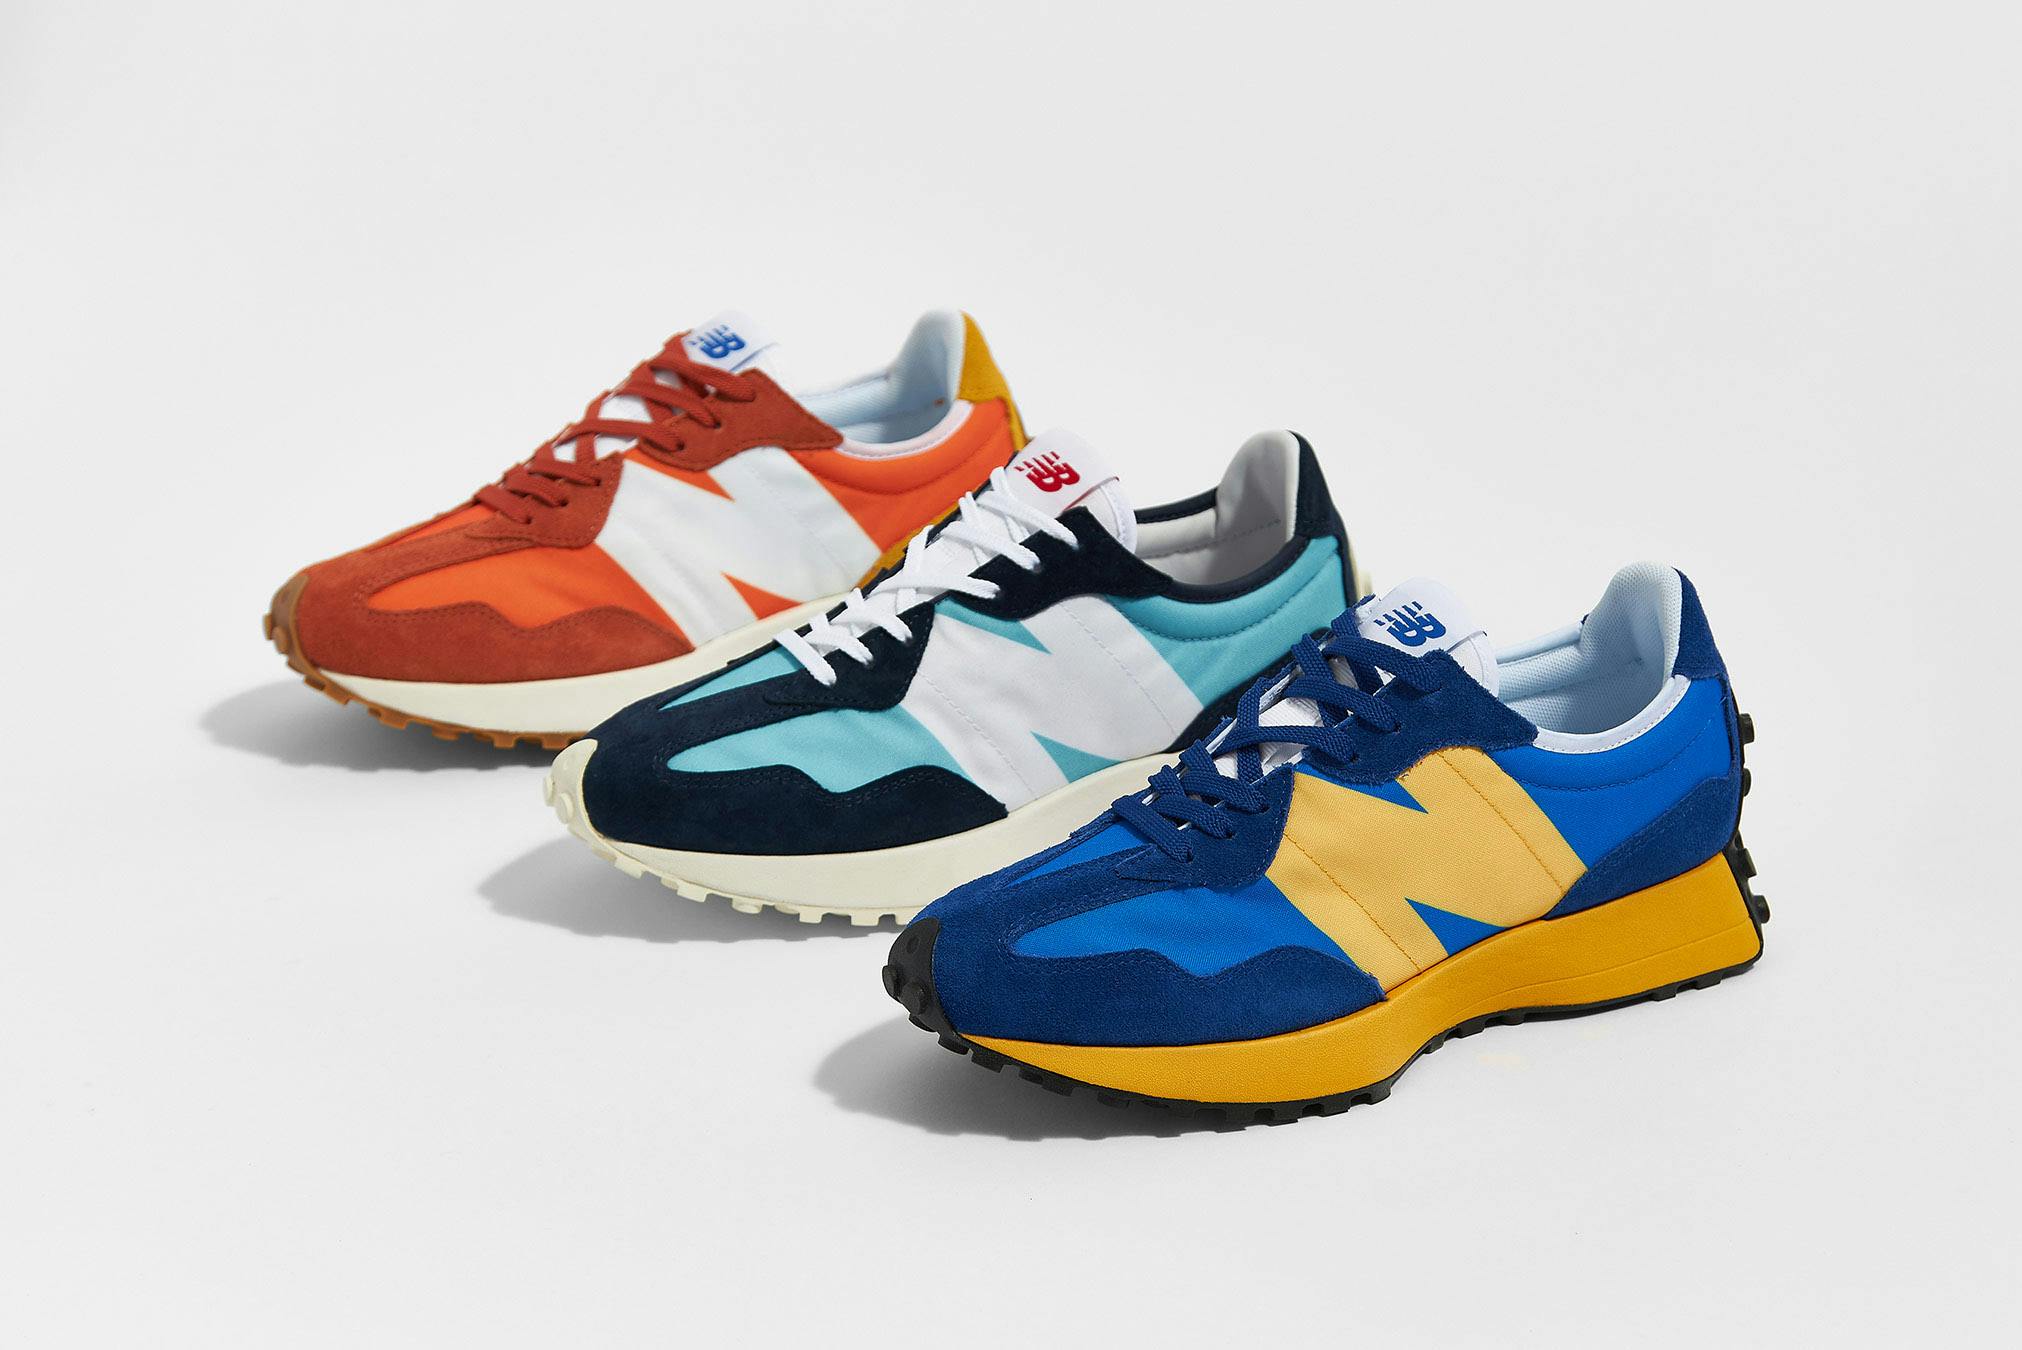 New Balance OG 327 Pack - Register Now on END. Launches | END.